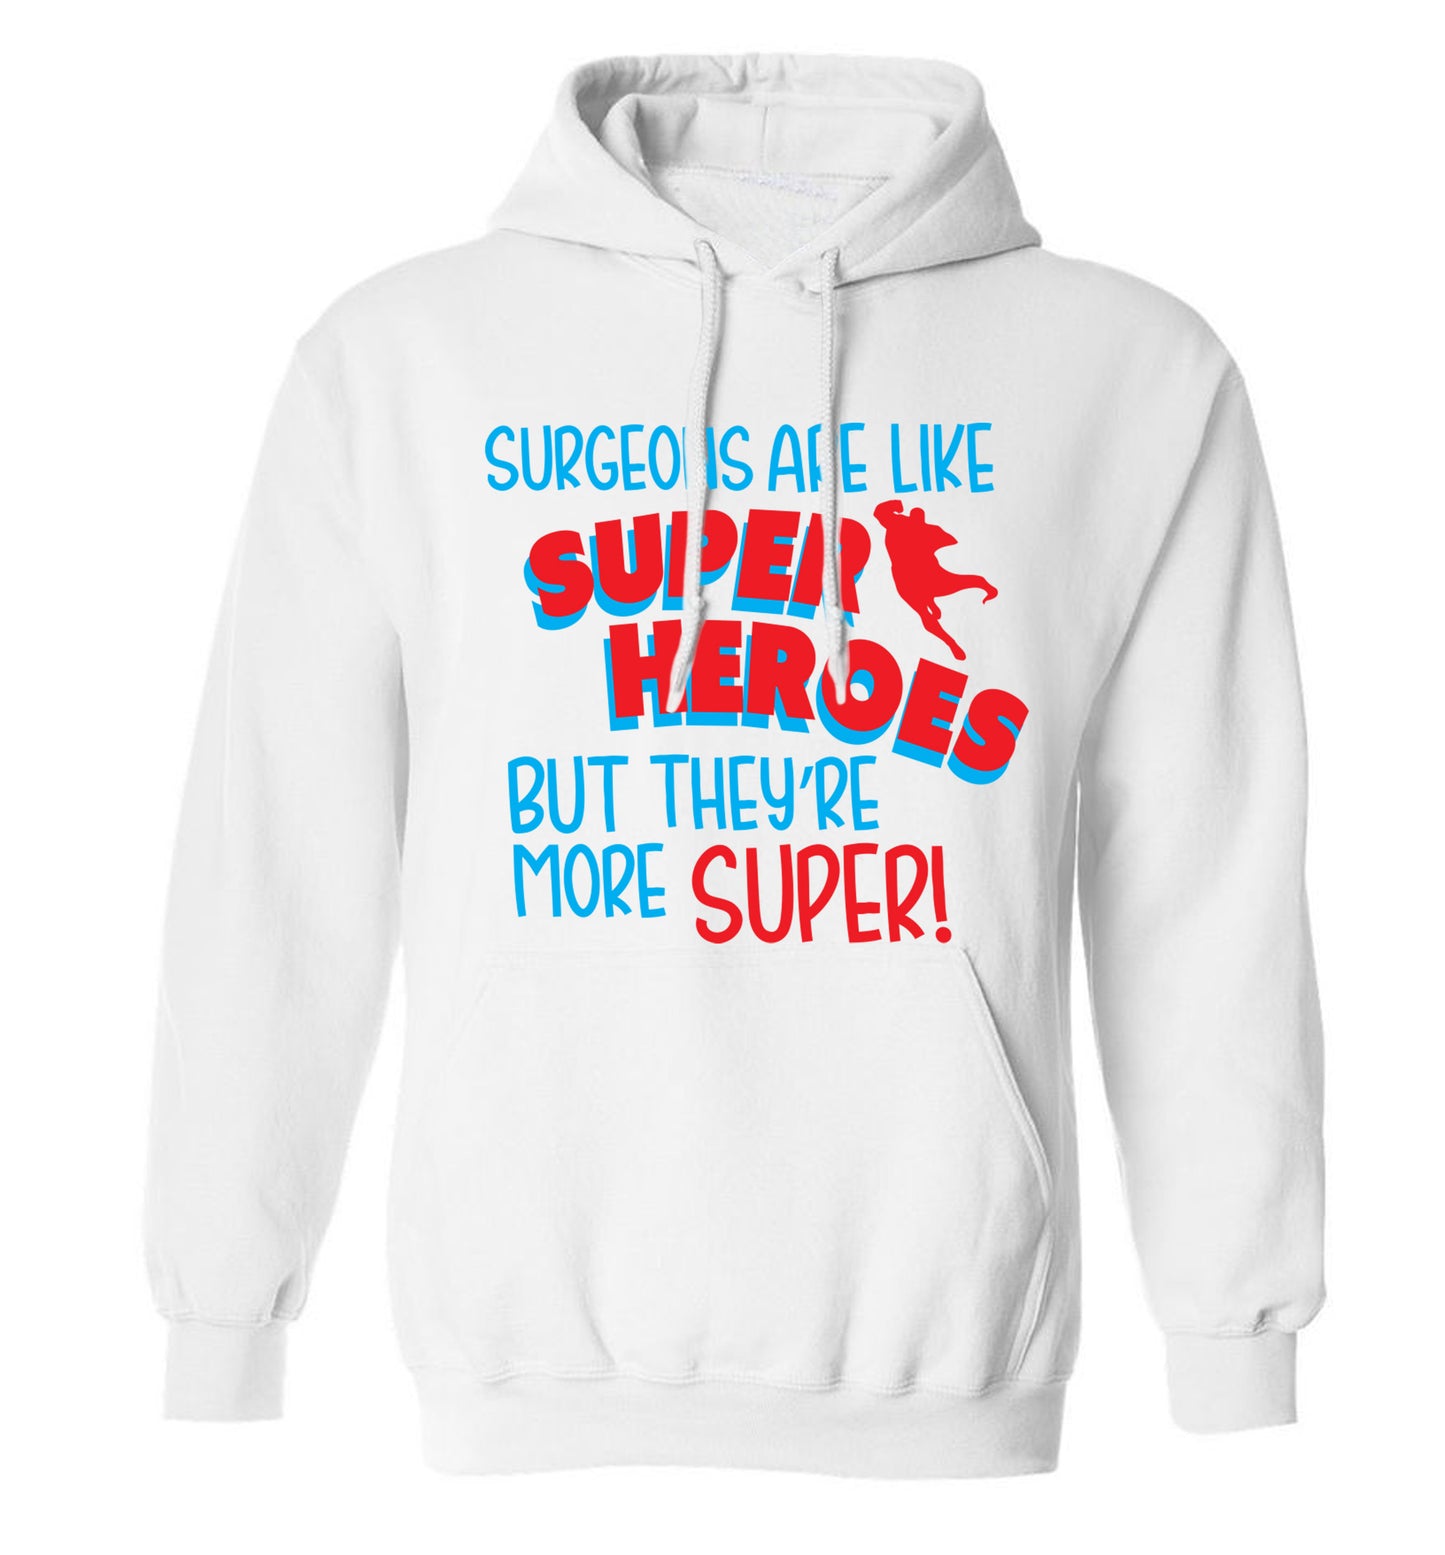 Surgeons are like superheros but they're more super adults unisex white hoodie 2XL